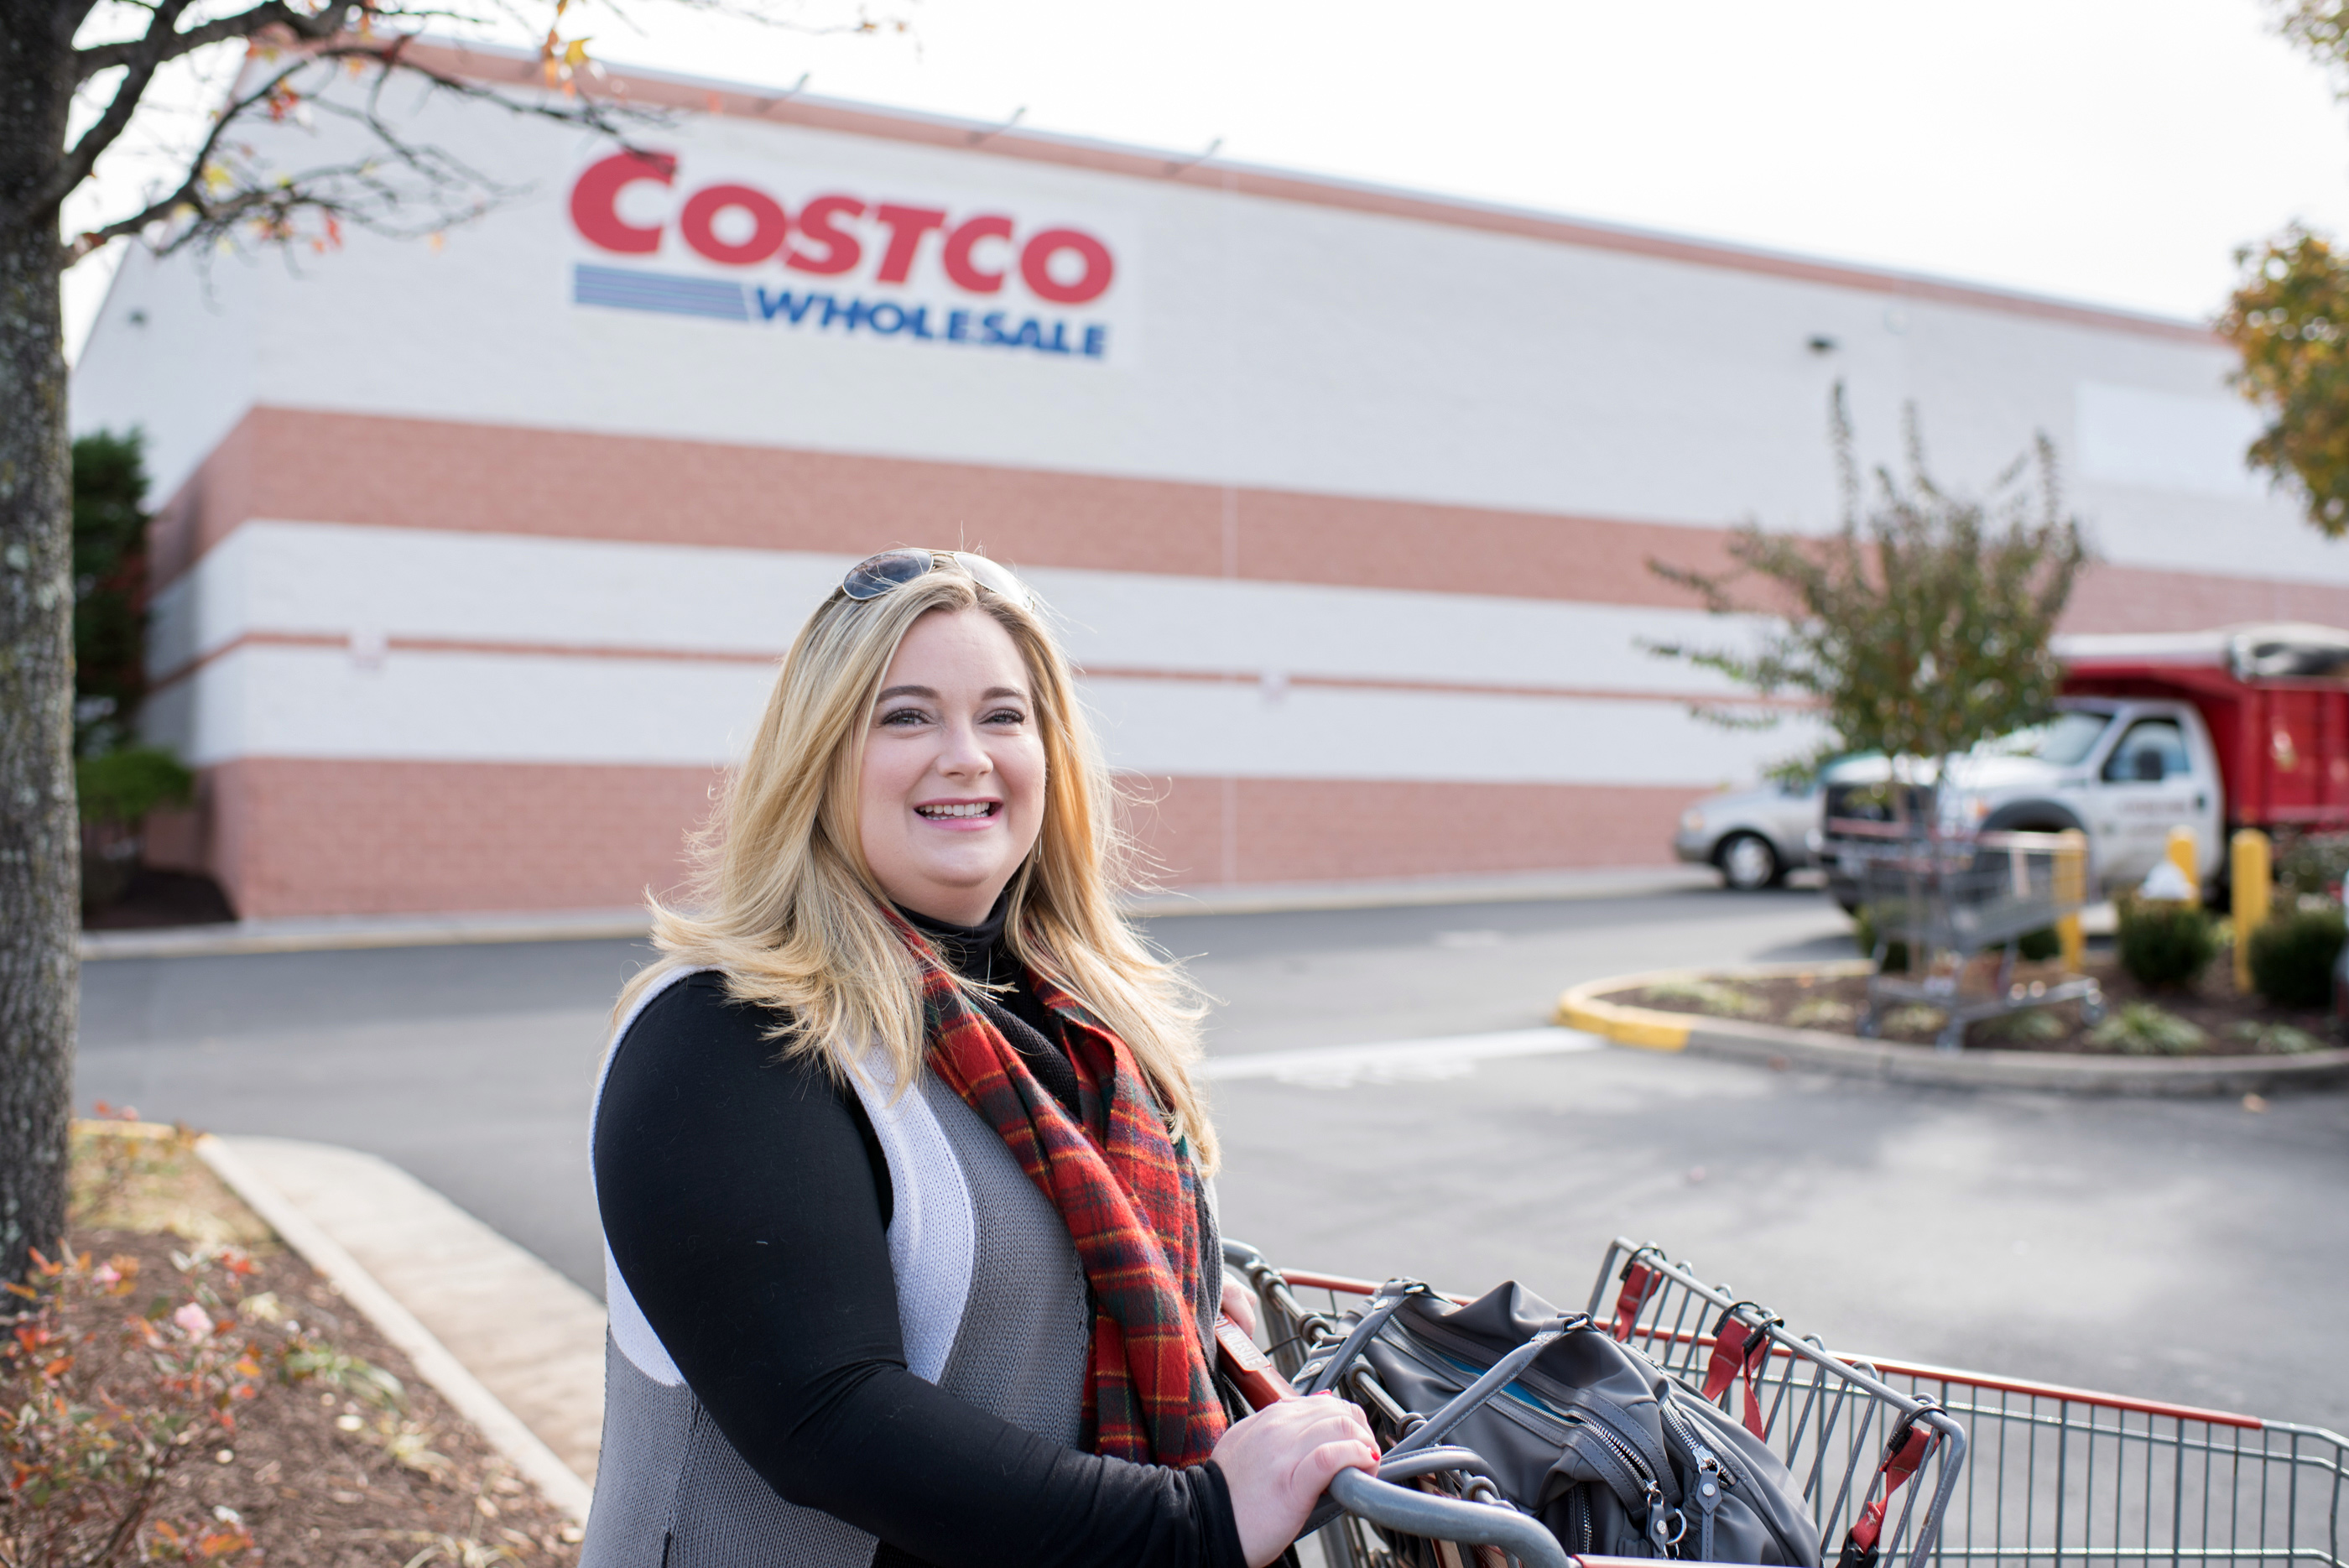 This Woman Has Traveled to 179 Costcos in 33 States and 5 Countries. Here Are Her Best Shopping Tips